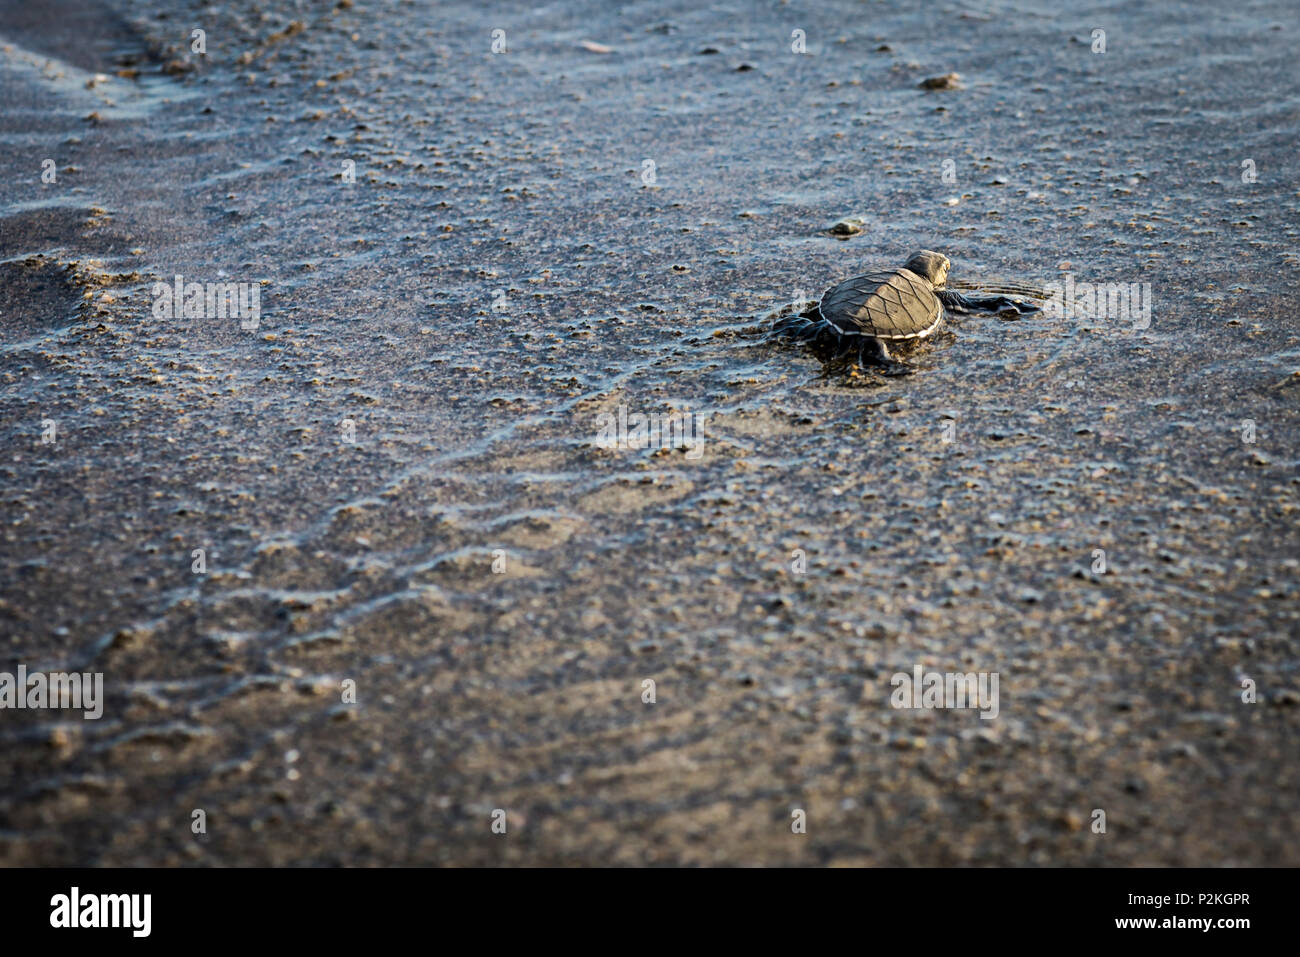 Baby green turtle shortly before the open sea in the wet sand - Indonesia, Java Stock Photo